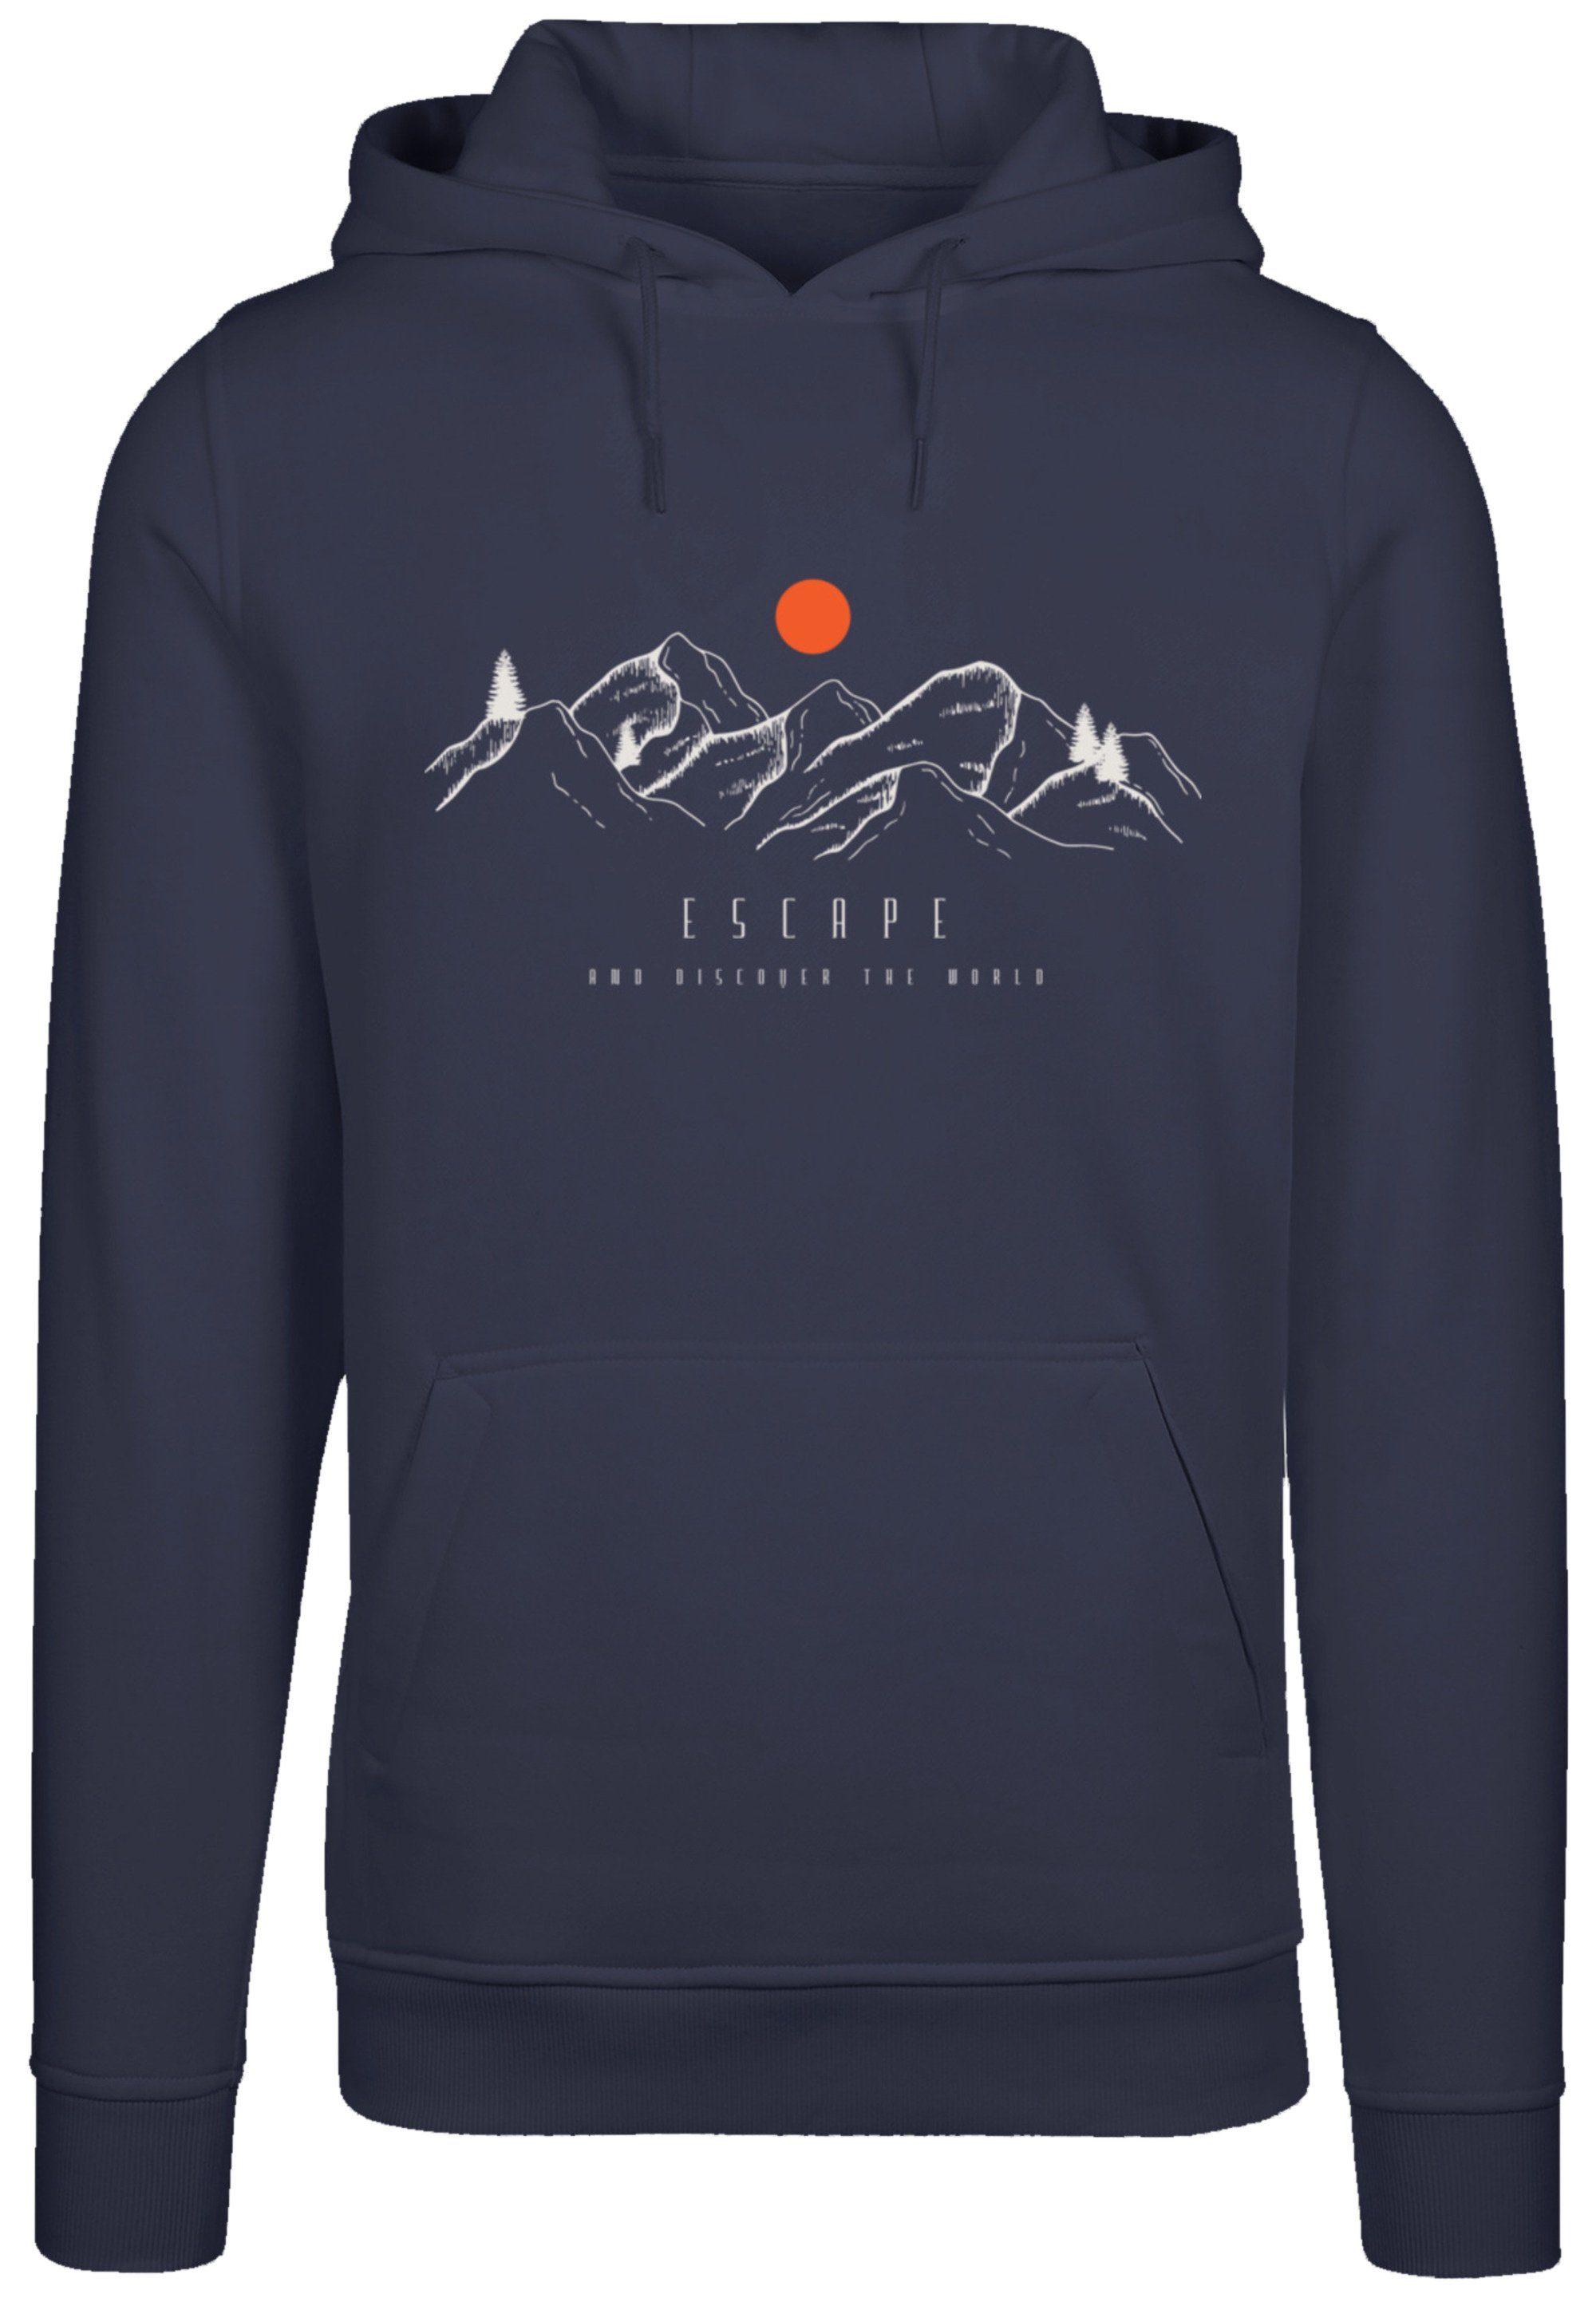 Bequem world F4NT4STIC Kapuzenpullover Hoodie, Warm, Discover the navy